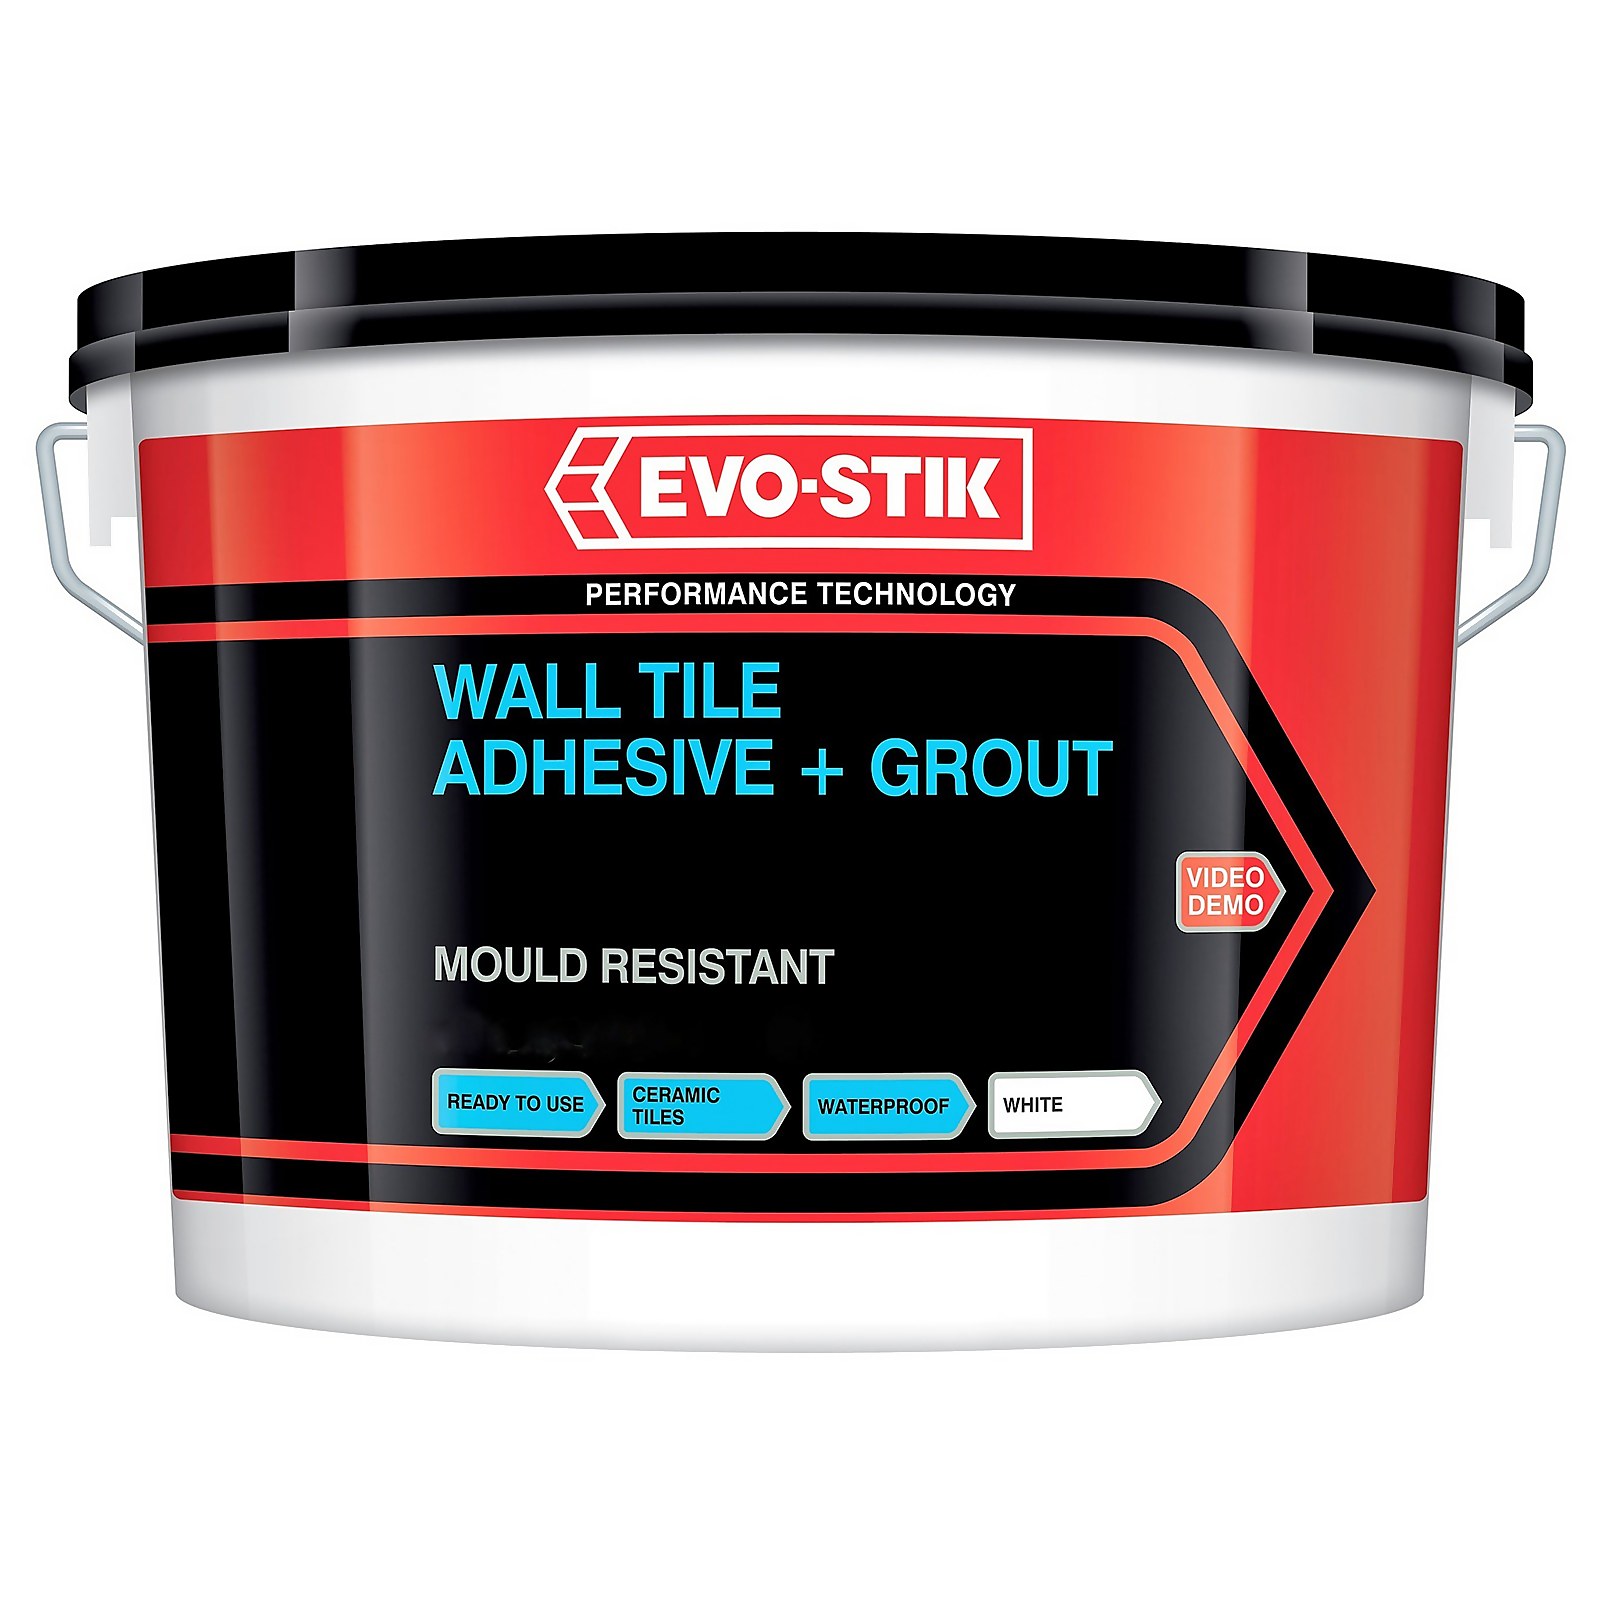 Photo of Evo-stik Mould Resistant Wall Tile Adhesive & Grout Large